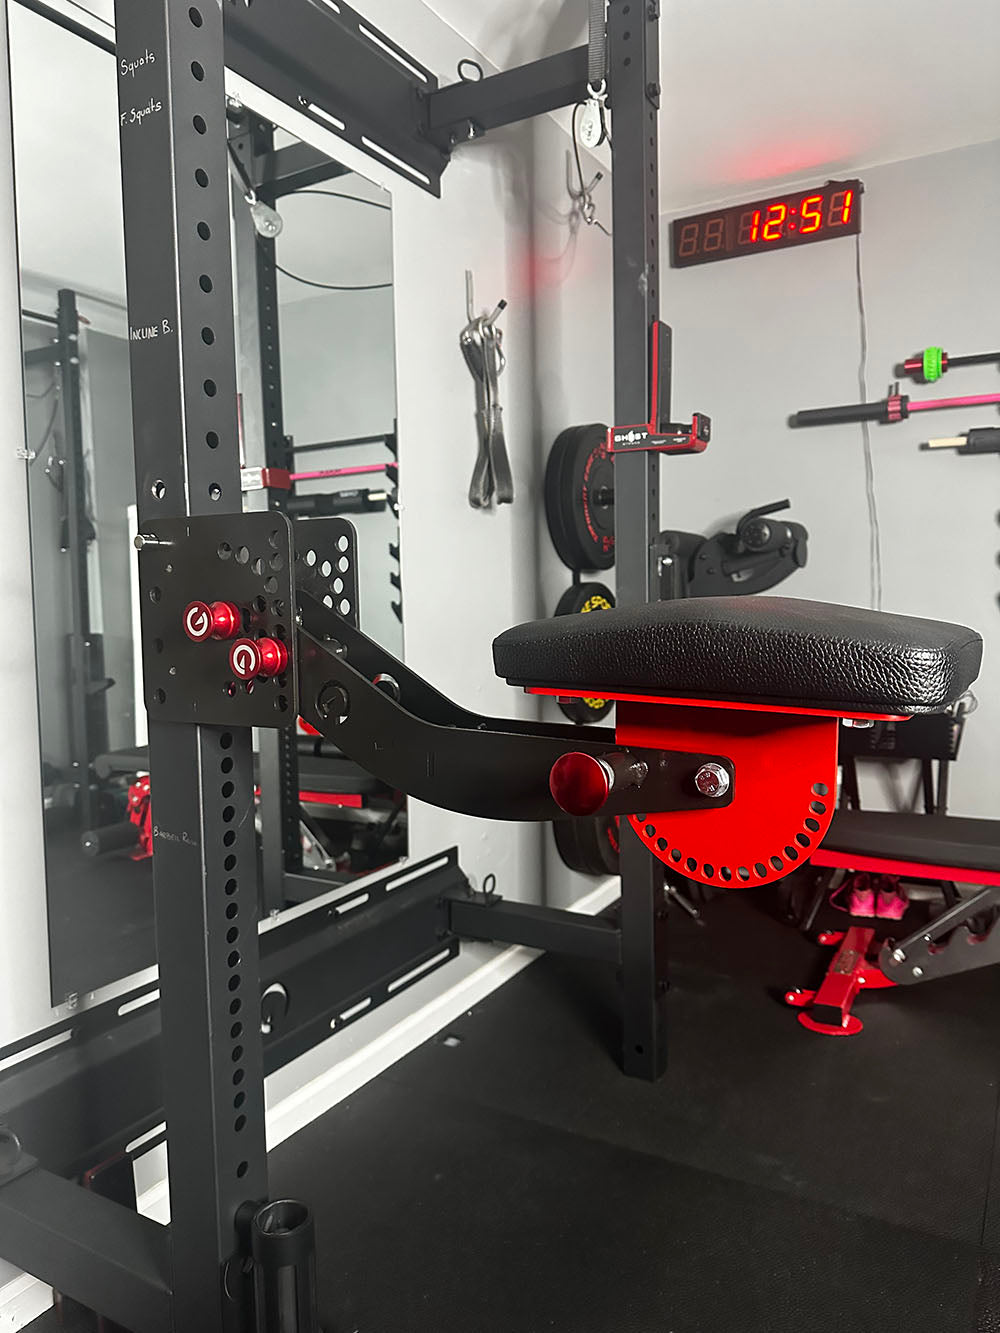 The rack-attaching, Infinity Arm can be utilized for chest-supported, arm-supported, back-supported, head-supported, and many other supported exercises. This image presents the Infinity Arm attached to a rack in a home gym.